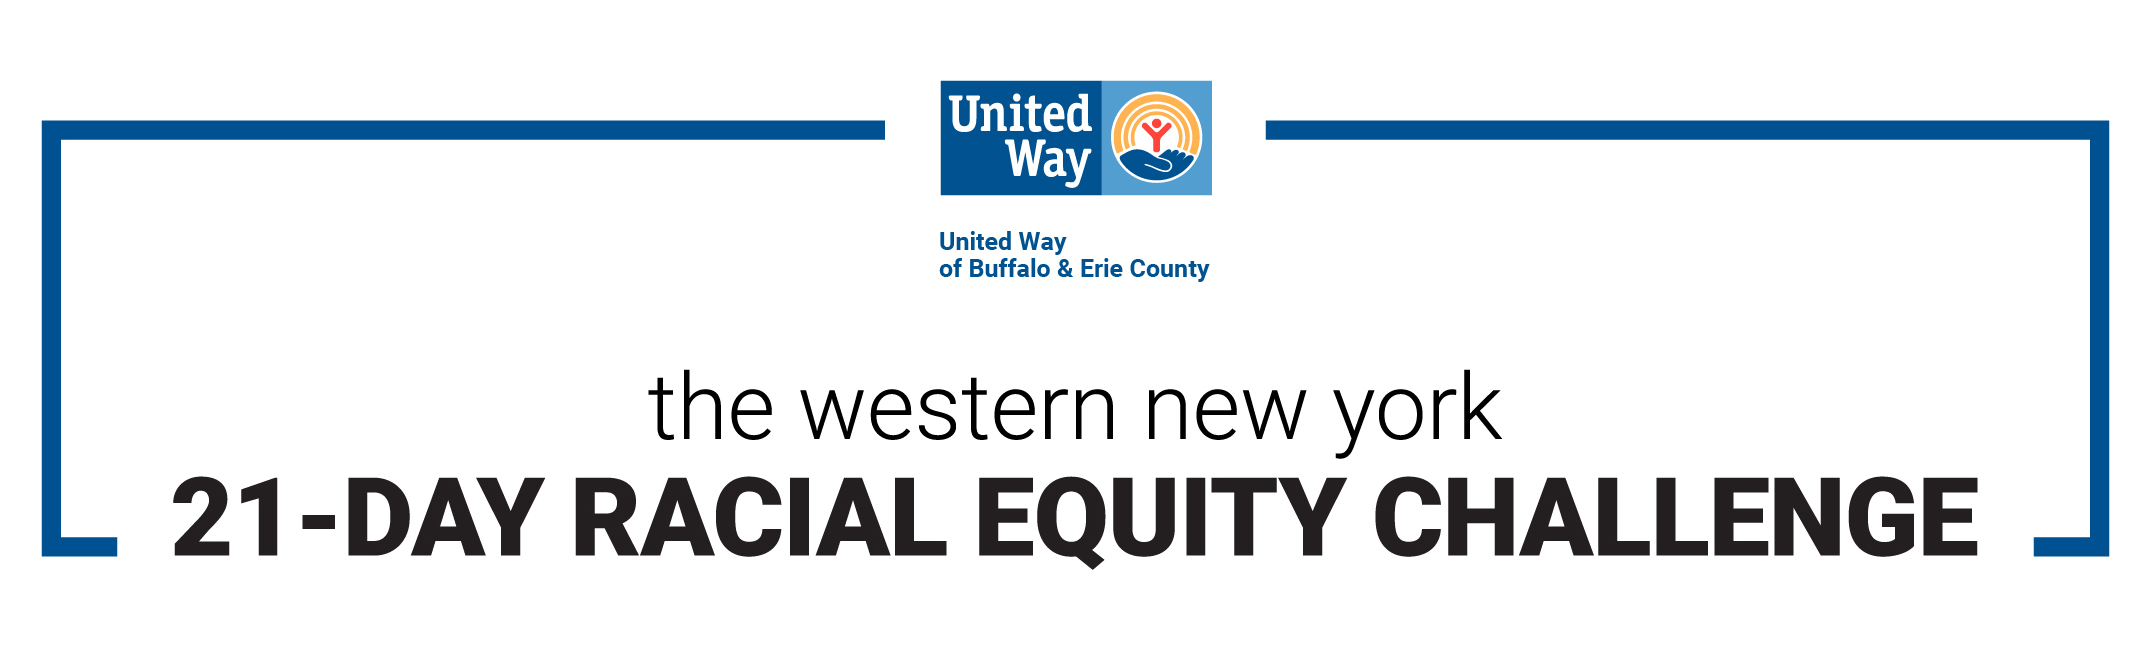 The Western New York 21-Day Racial Equity Challenge Day 4